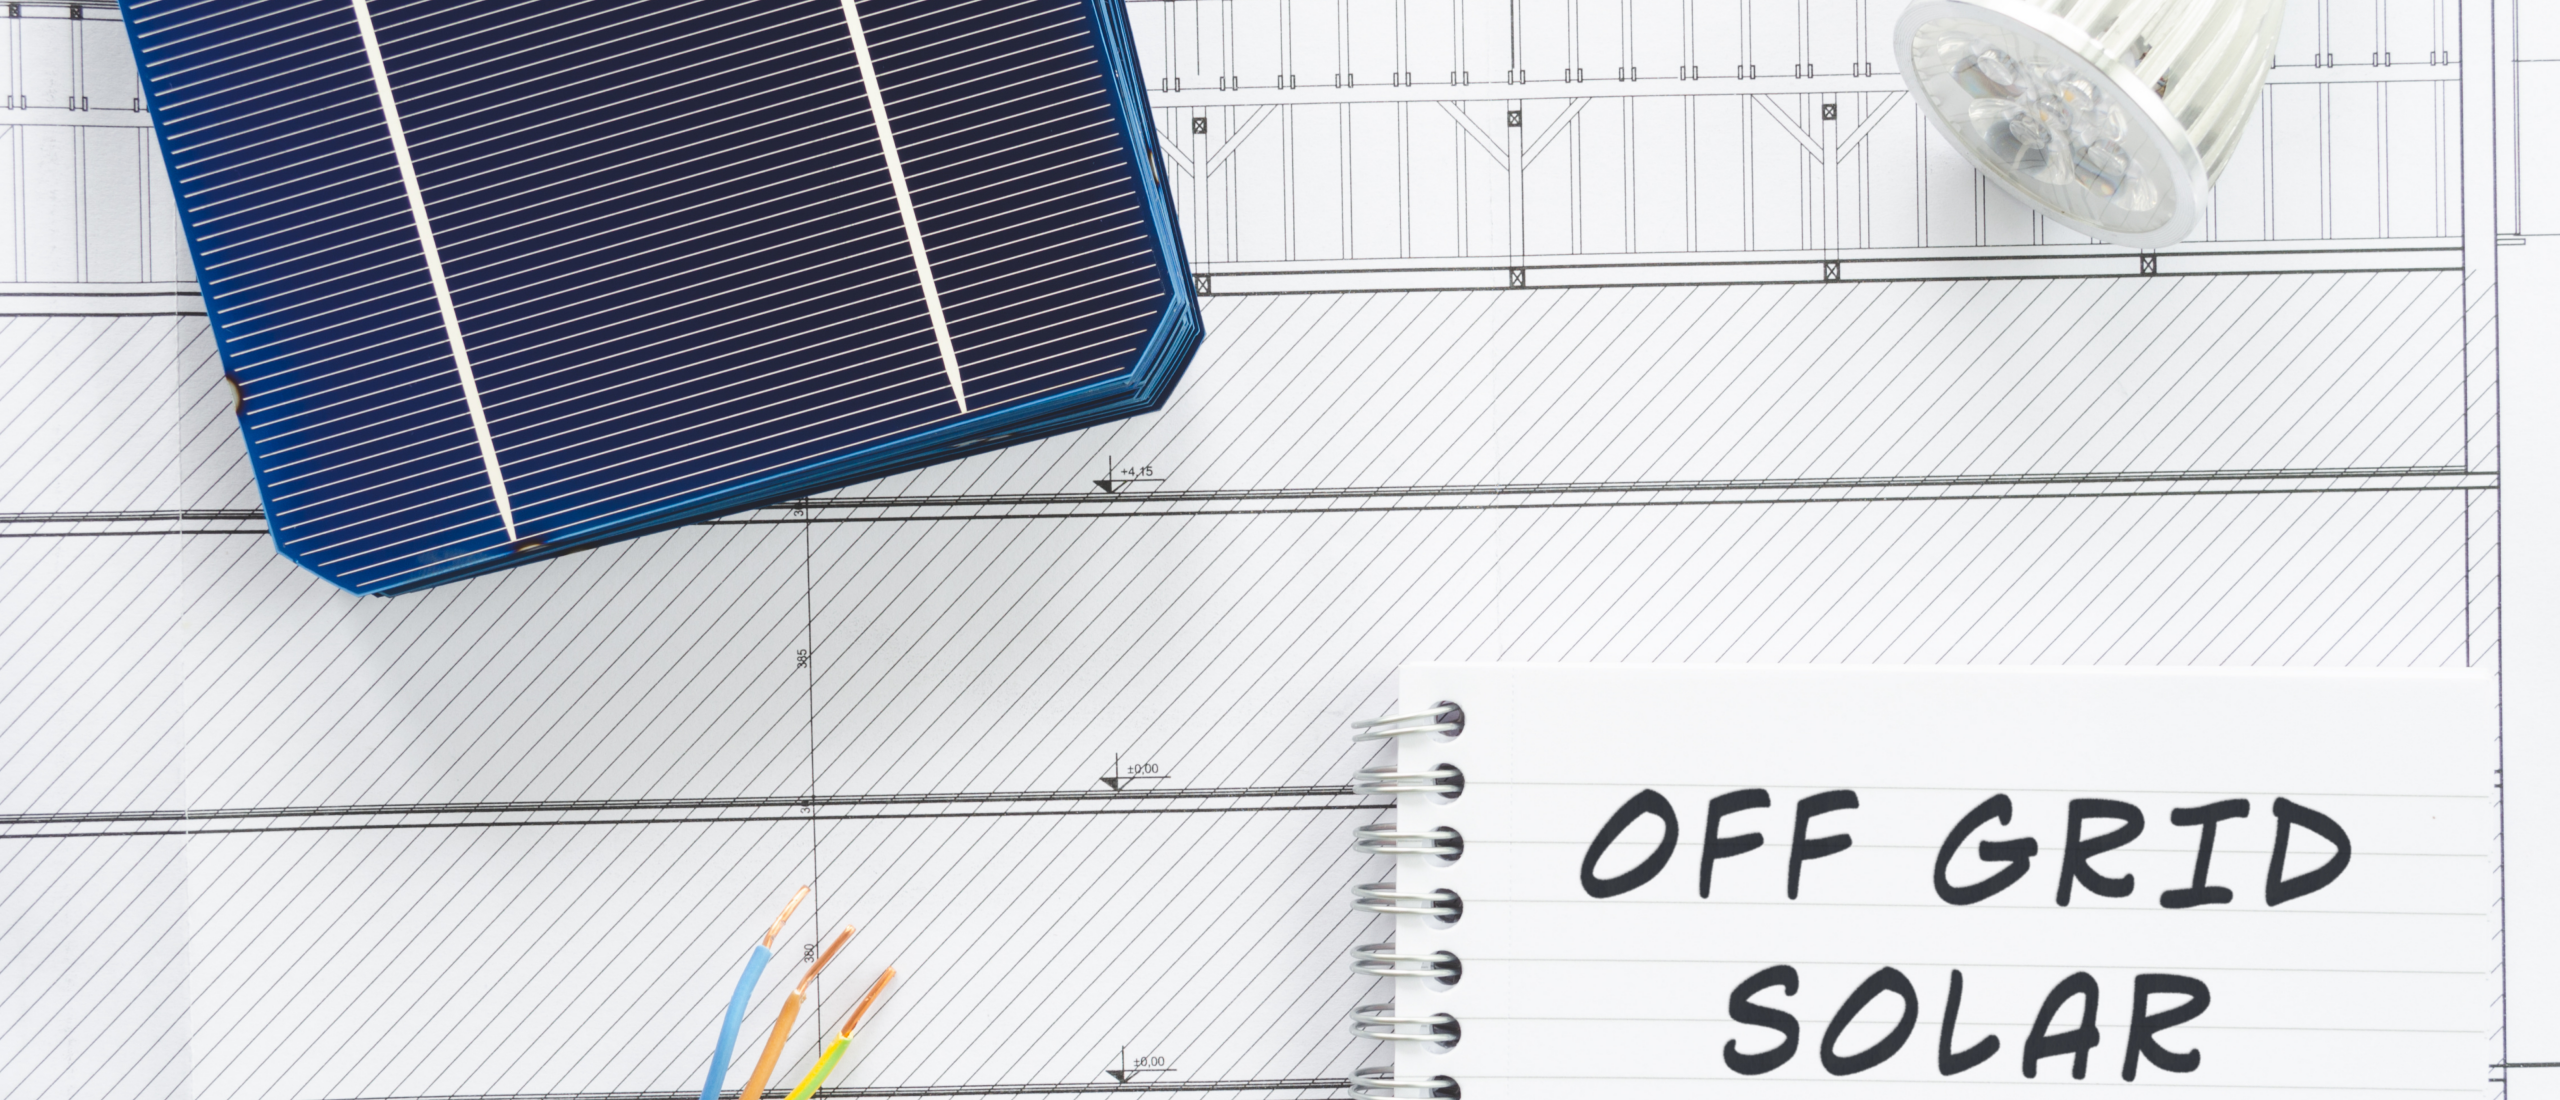 Electricity consumption and high upfront costs: a hurdle for off-grid solar systems?